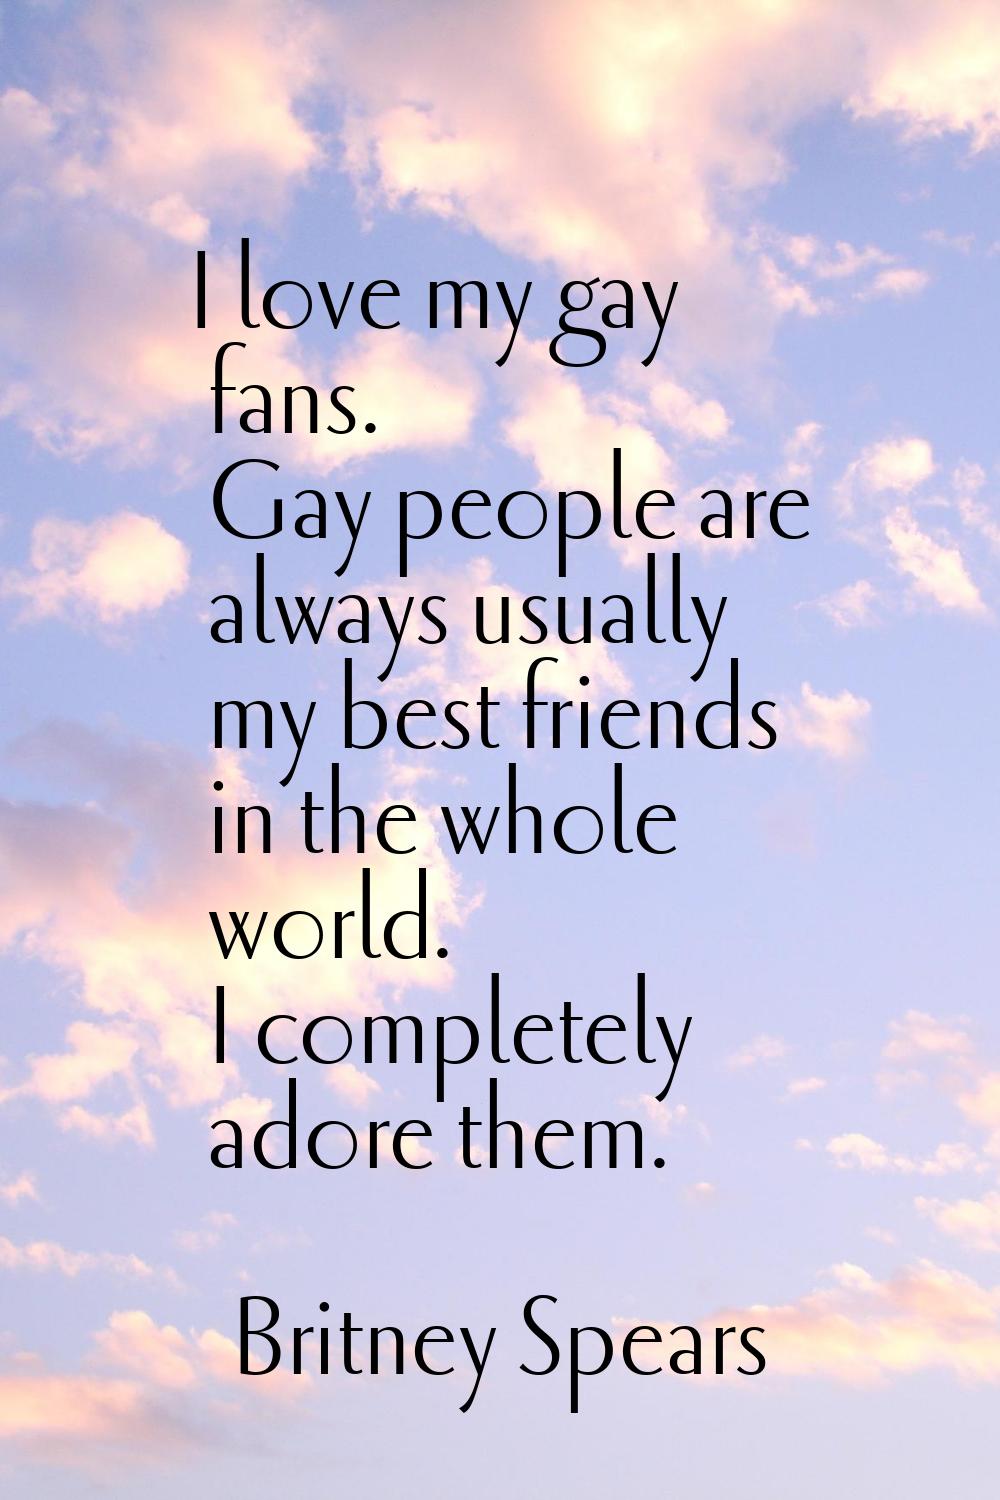 I love my gay fans. Gay people are always usually my best friends in the whole world. I completely 